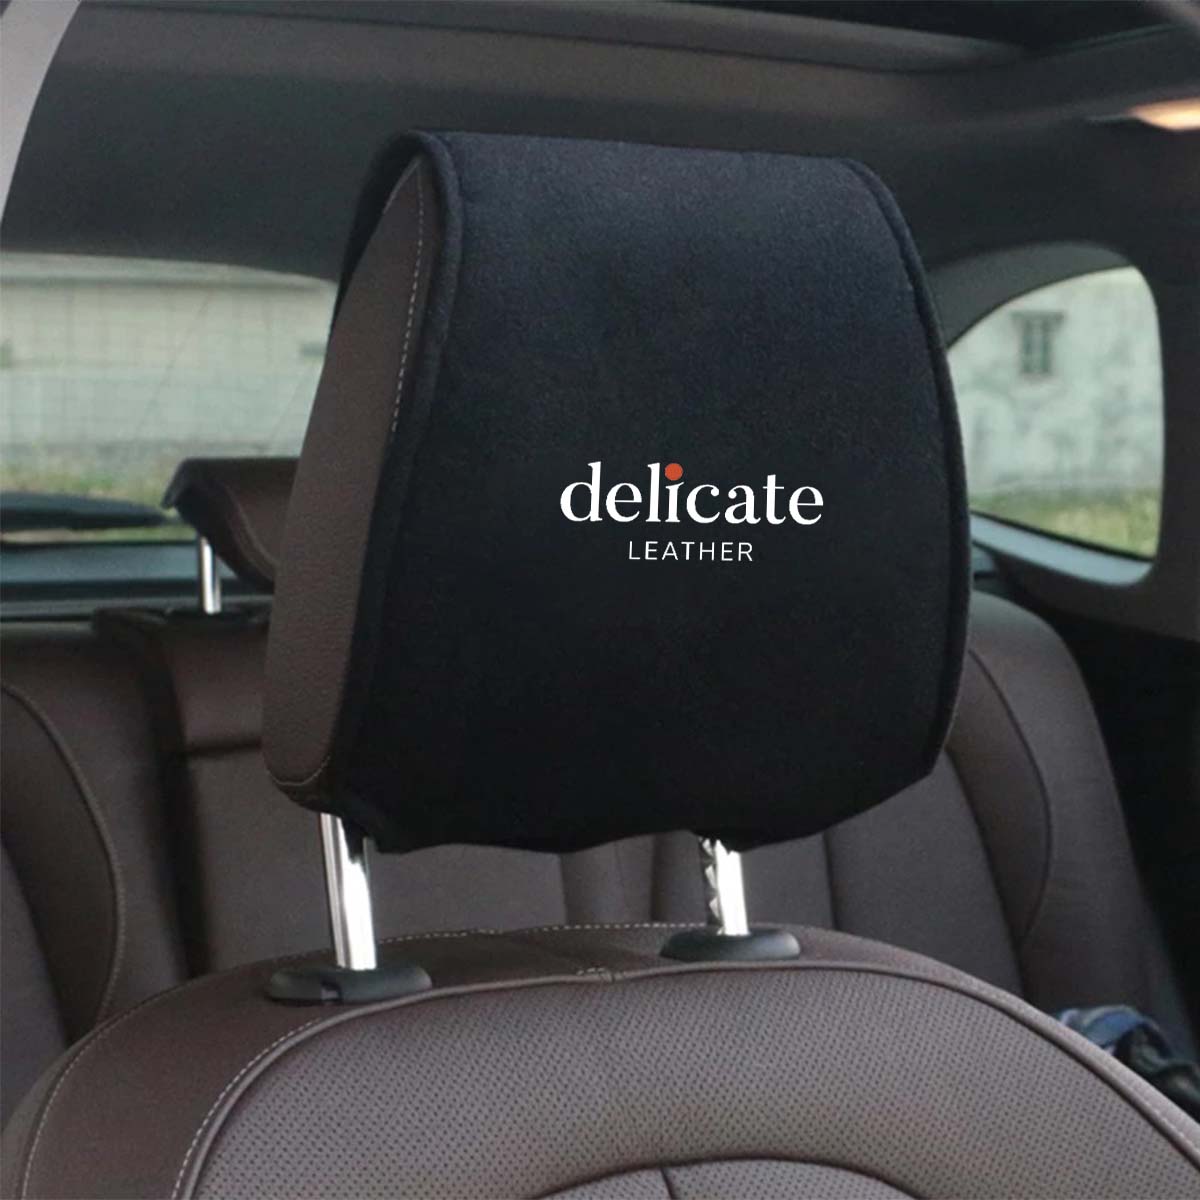 Jaguar Car Seat Headrest Cover: Stylish Protection for Your Vehicle's Headrests